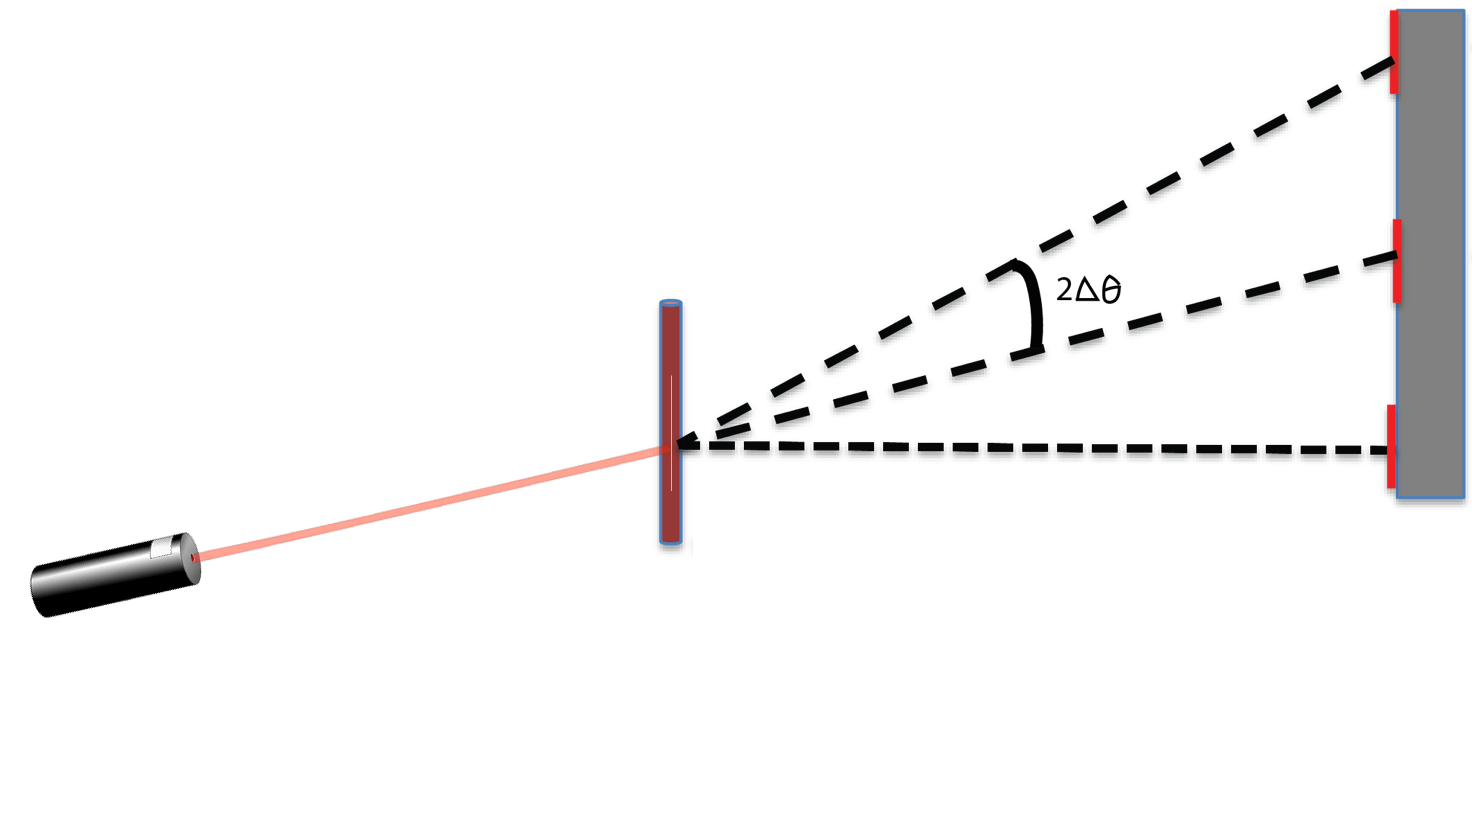 Fig. 2 (Click to enlarge). How light scatters (click image to enlarge)